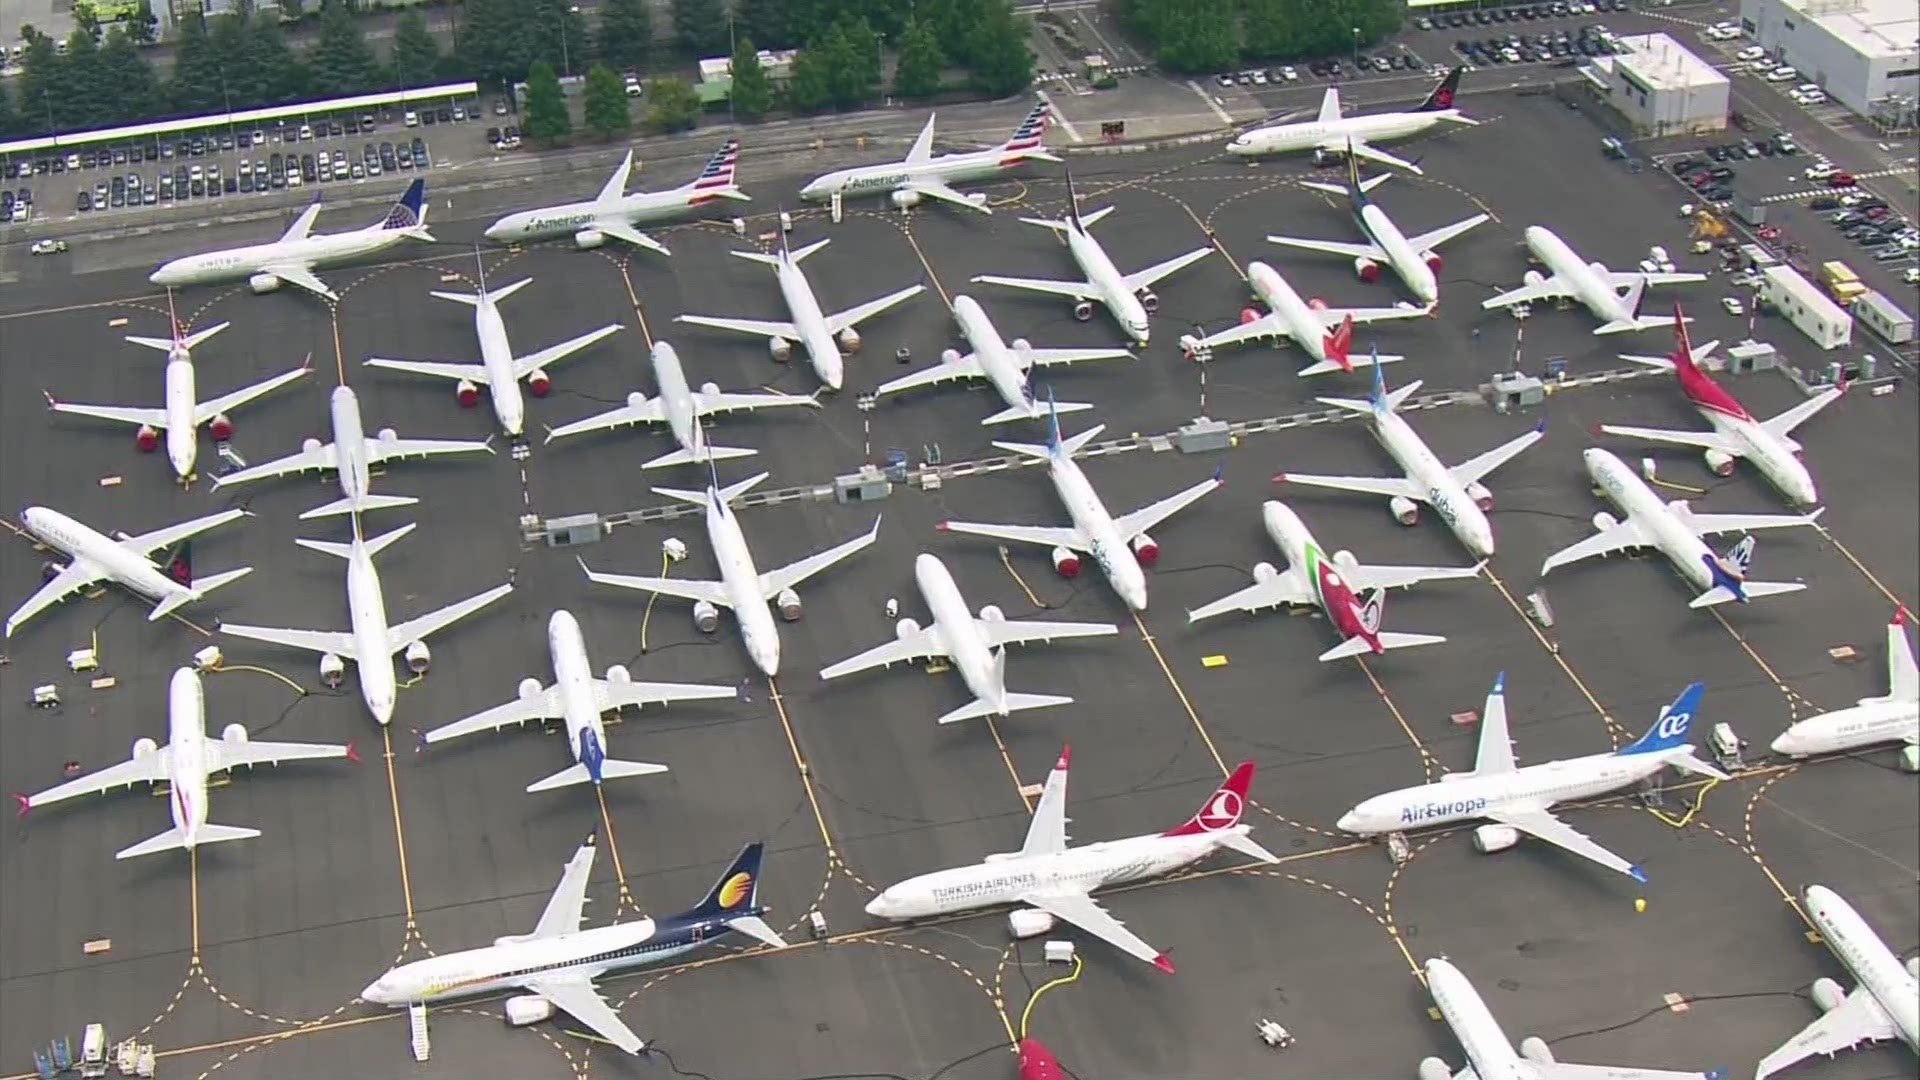 KING 5 helicopter SkyKING flew over a crowded Boeing Field in Seattle, where dozens of Boeing 737 Max planes remain grounded.